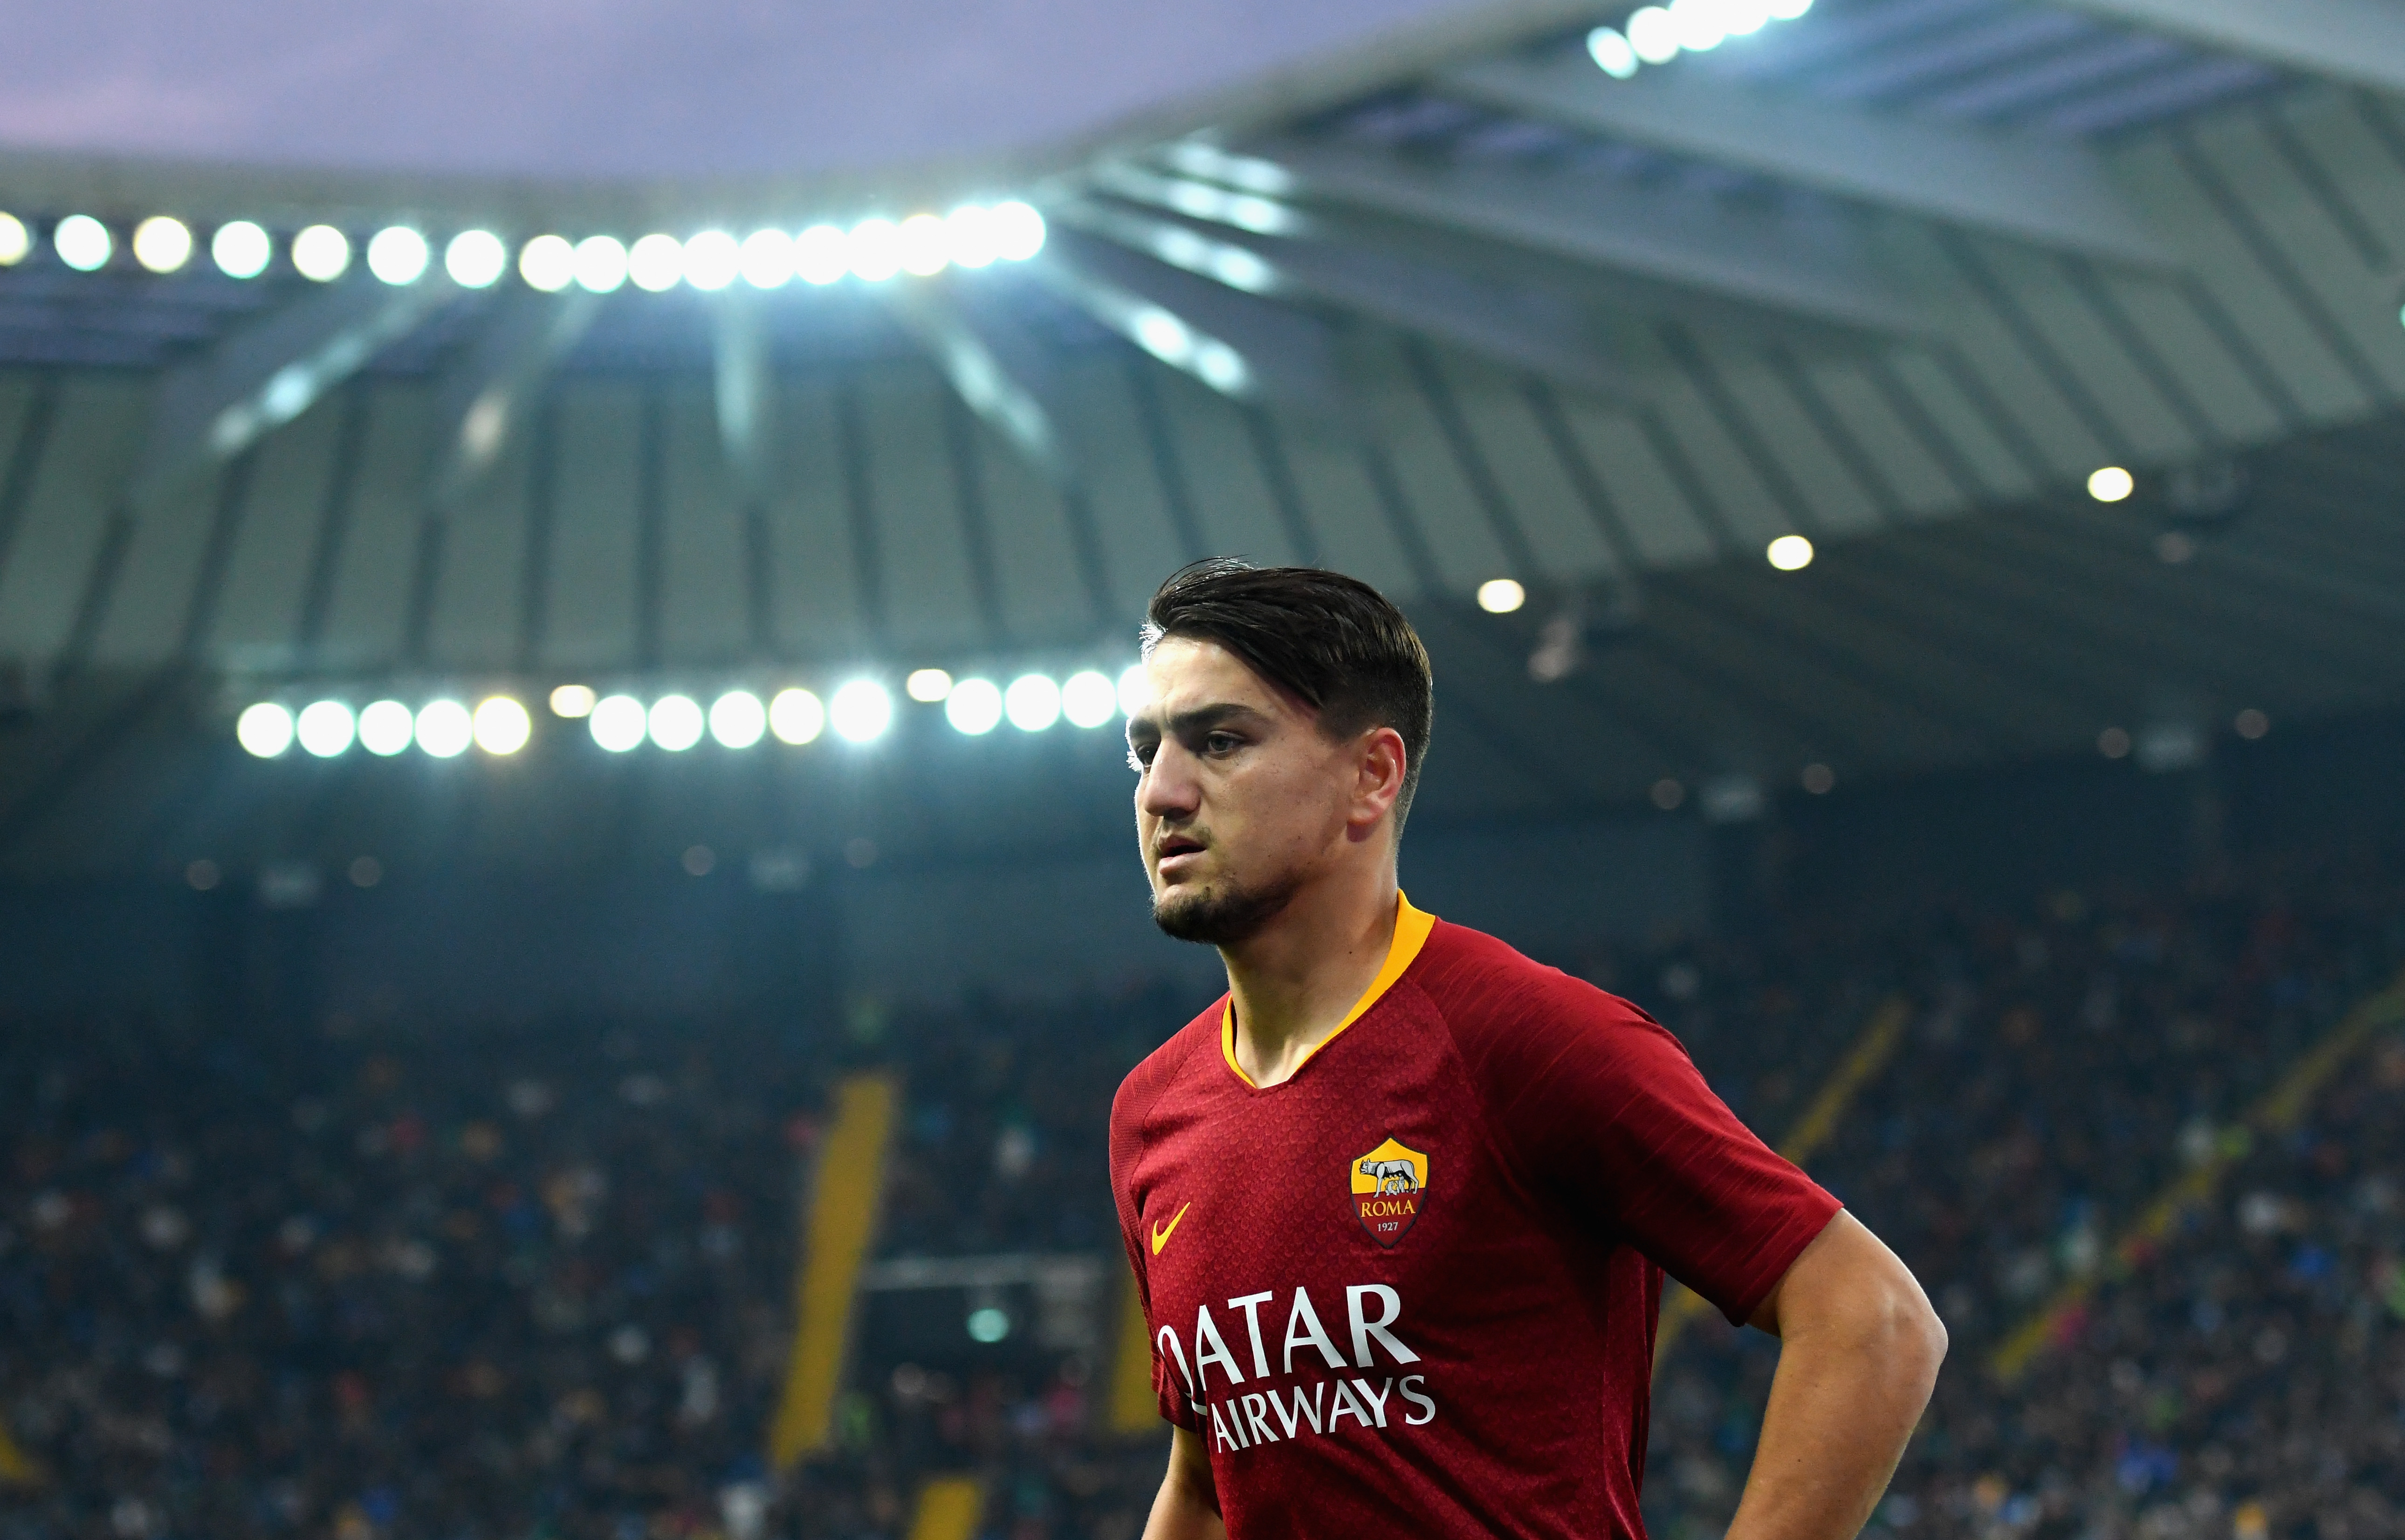 UDINE, ITALY - NOVEMBER 24: Cengiz Under of AS Roma looks on during the Serie A match between Udinese and AS Roma at Stadio Friuli on November 24, 2018 in Udine, Italy.  (Photo by Alessandro Sabattini/Getty Images)